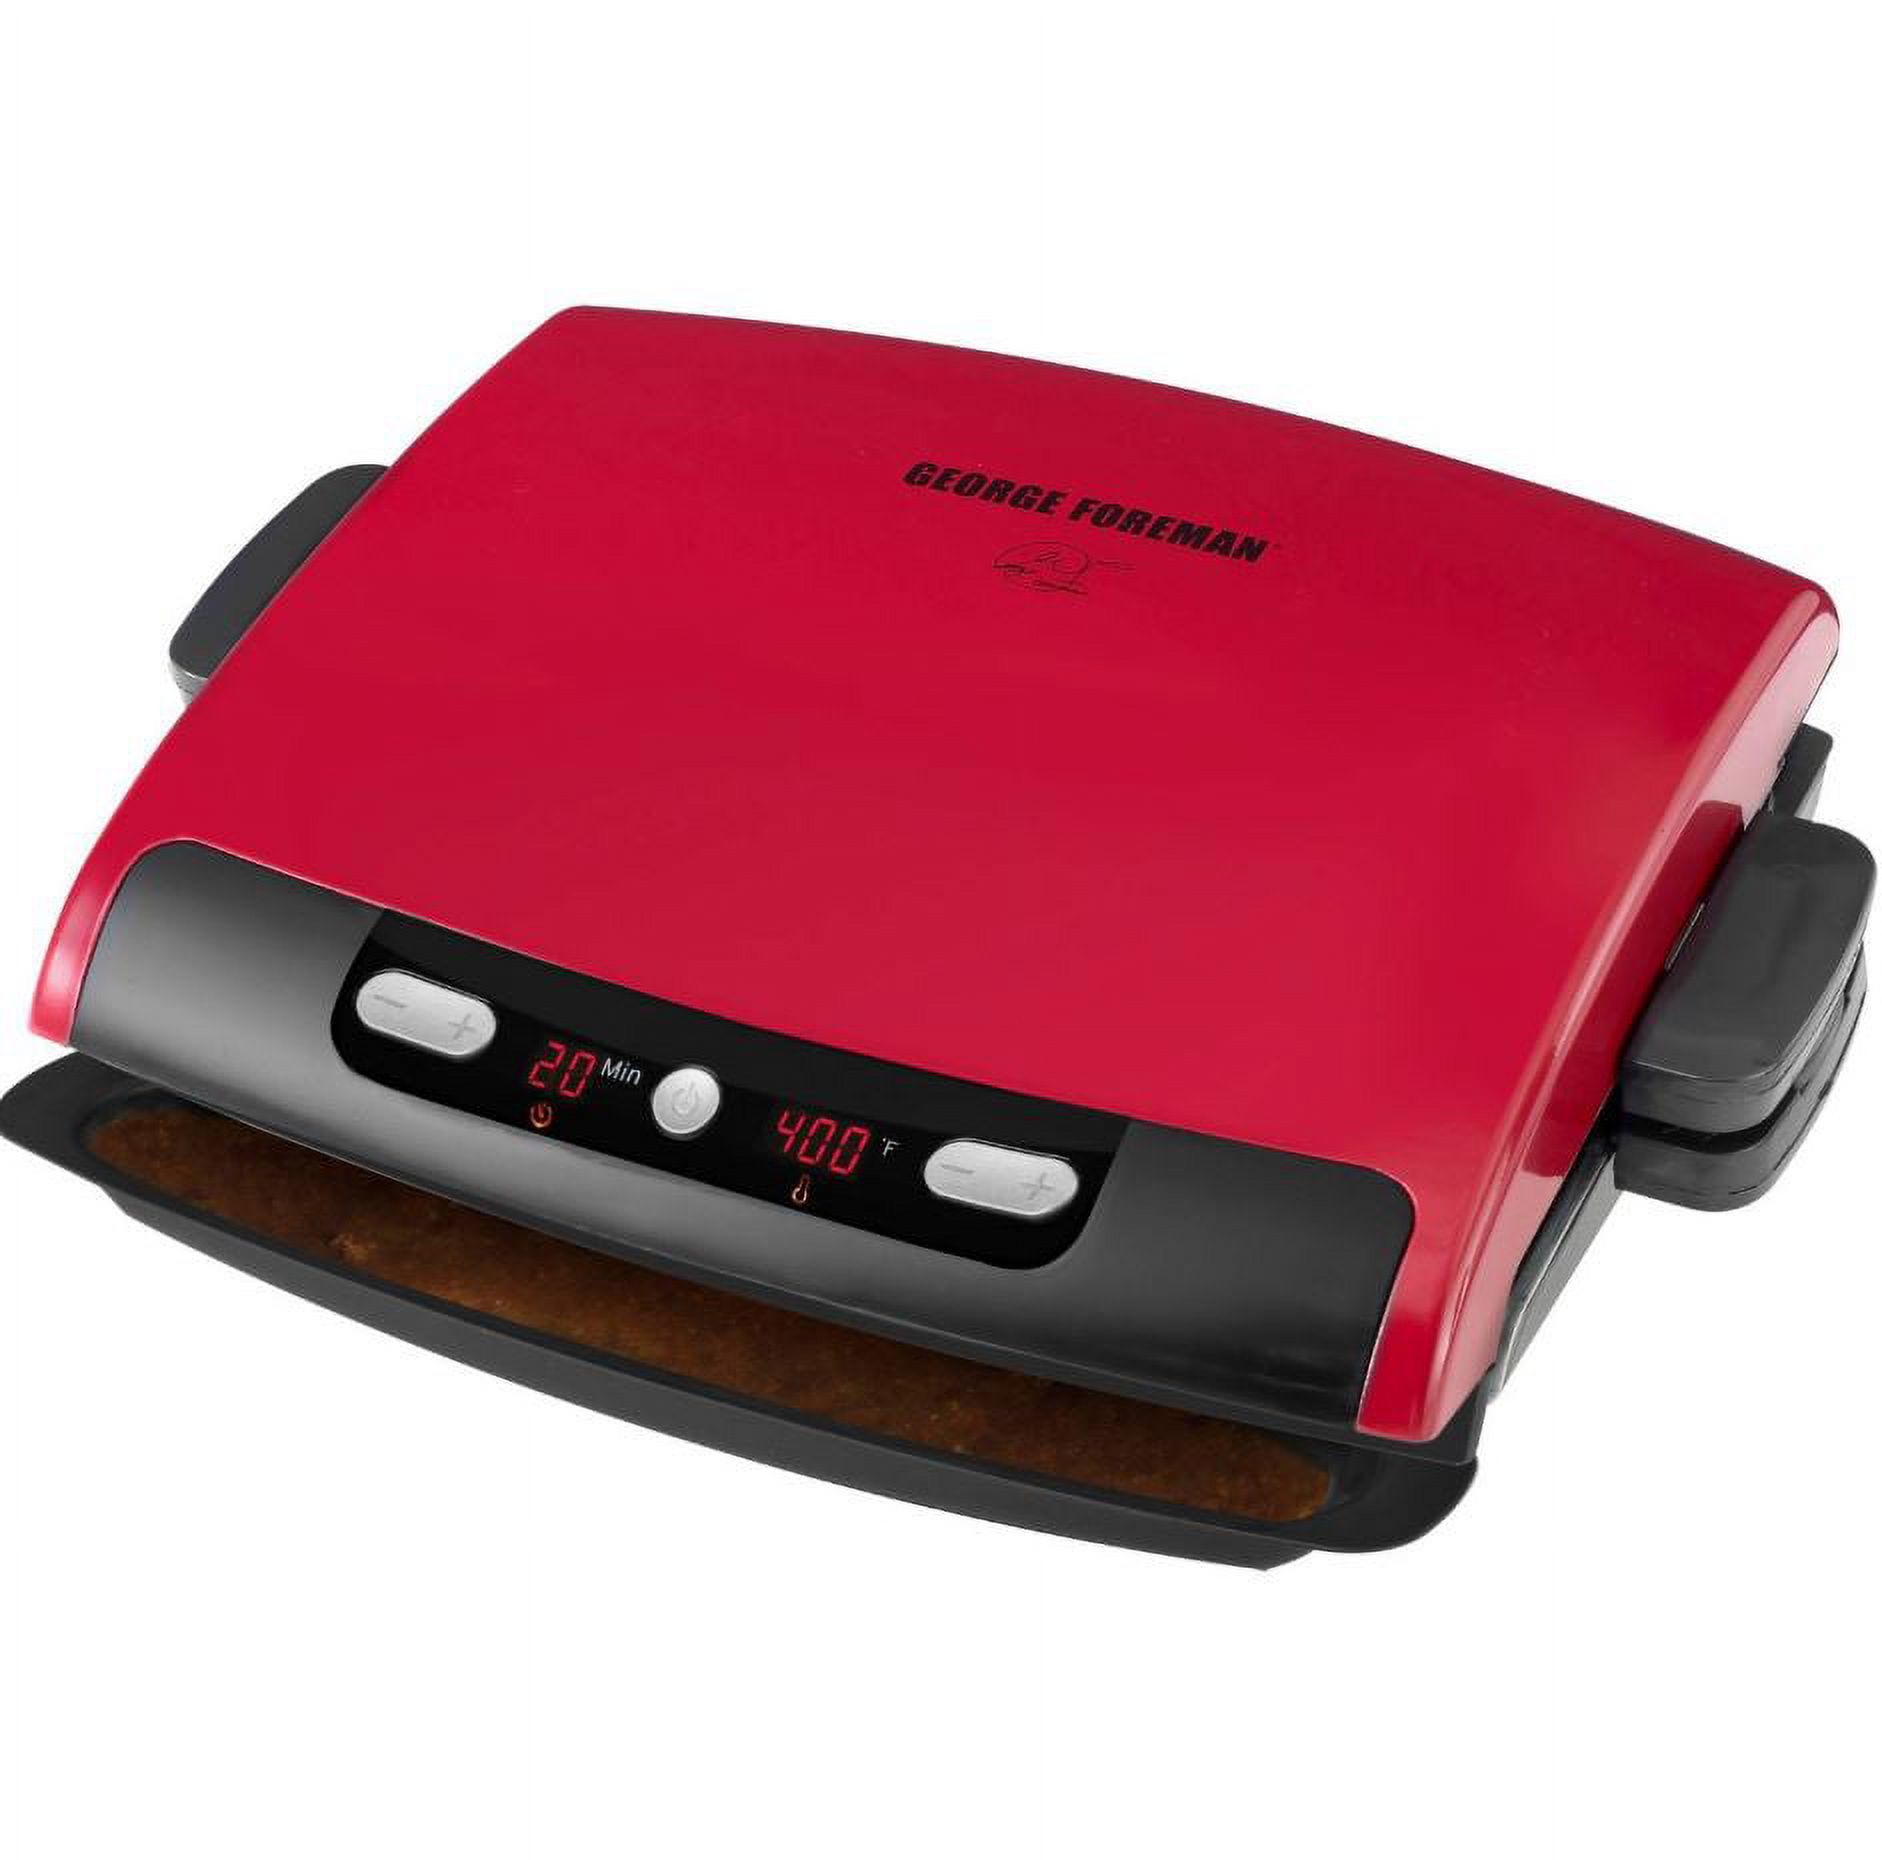 George Foreman 6-Serving Digital Timer & Temp Removable Plate Grill, Red, GRP95R - image 1 of 3